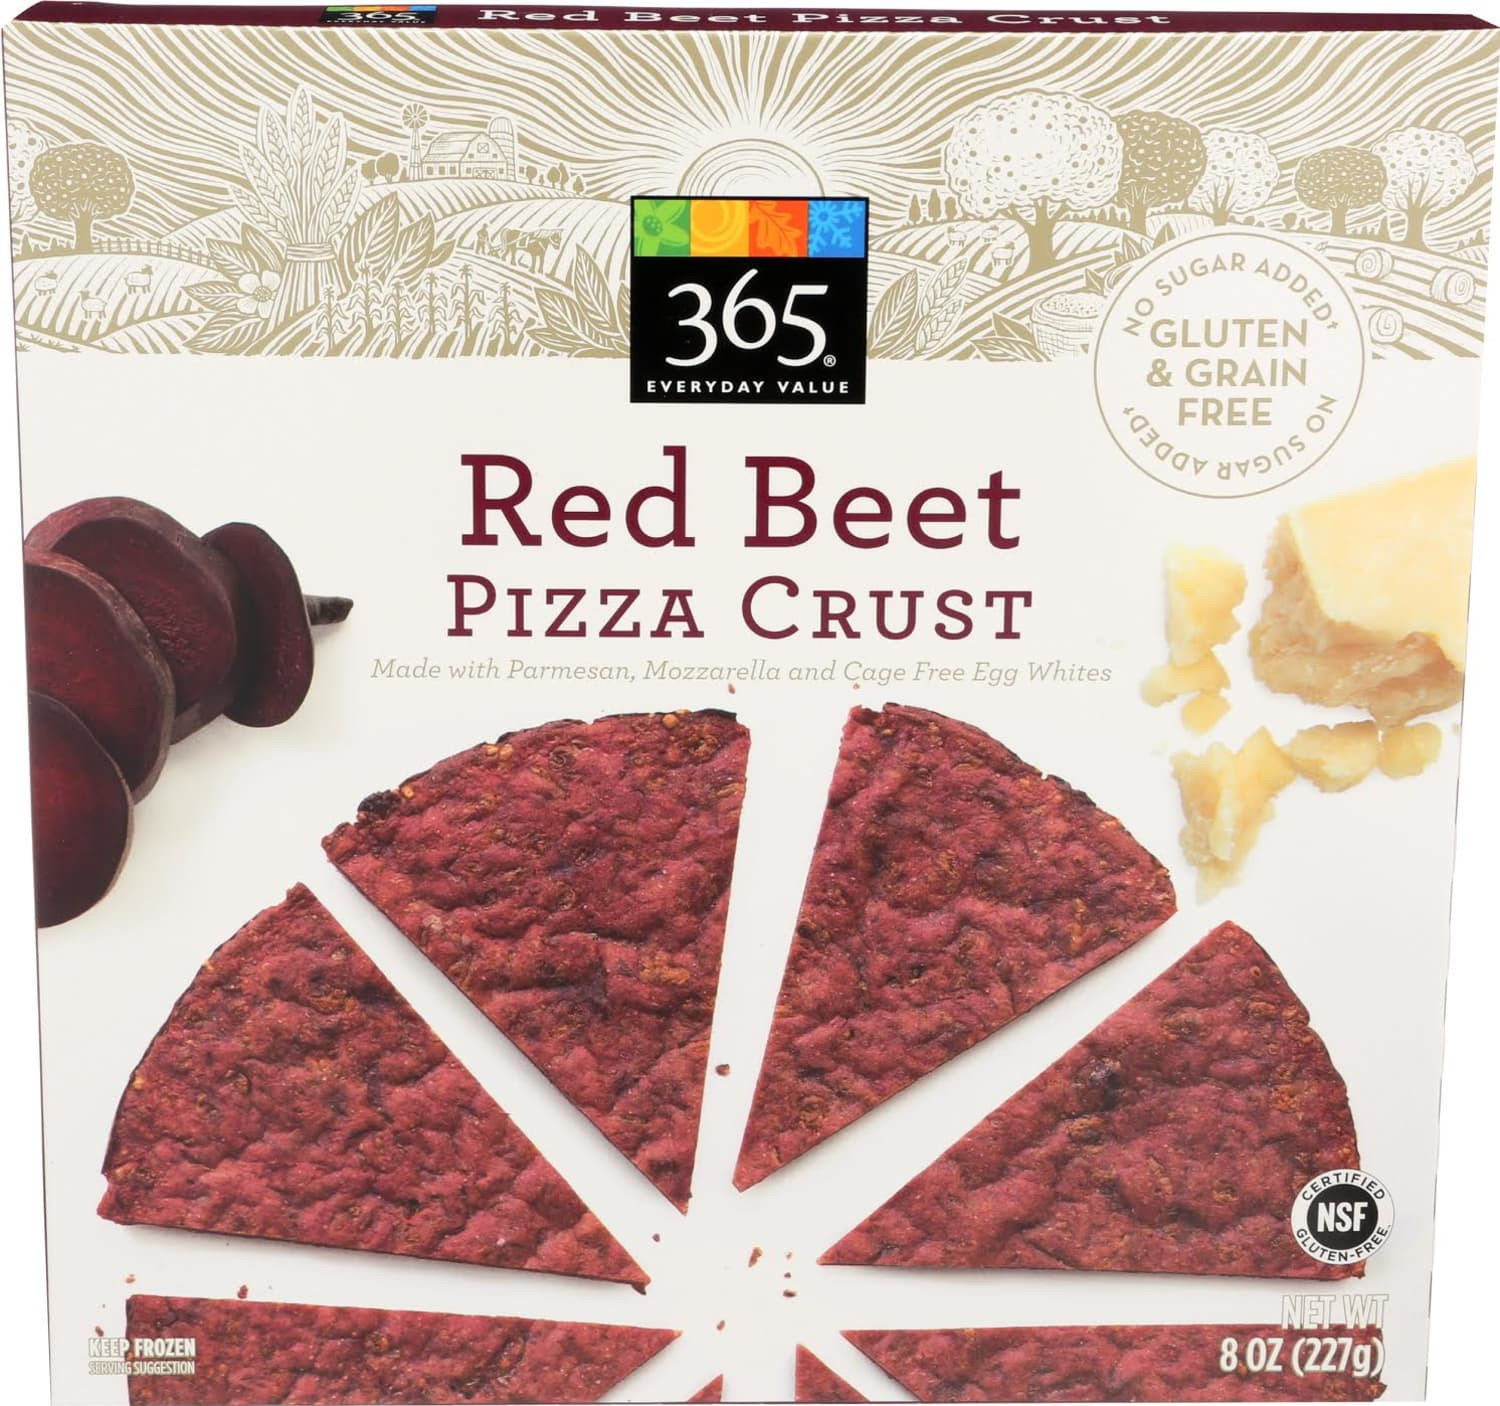 Gluten Free Pizza Dough Whole Foods
 Gluten Free Beet Pizza Crust at Whole Foods Trend